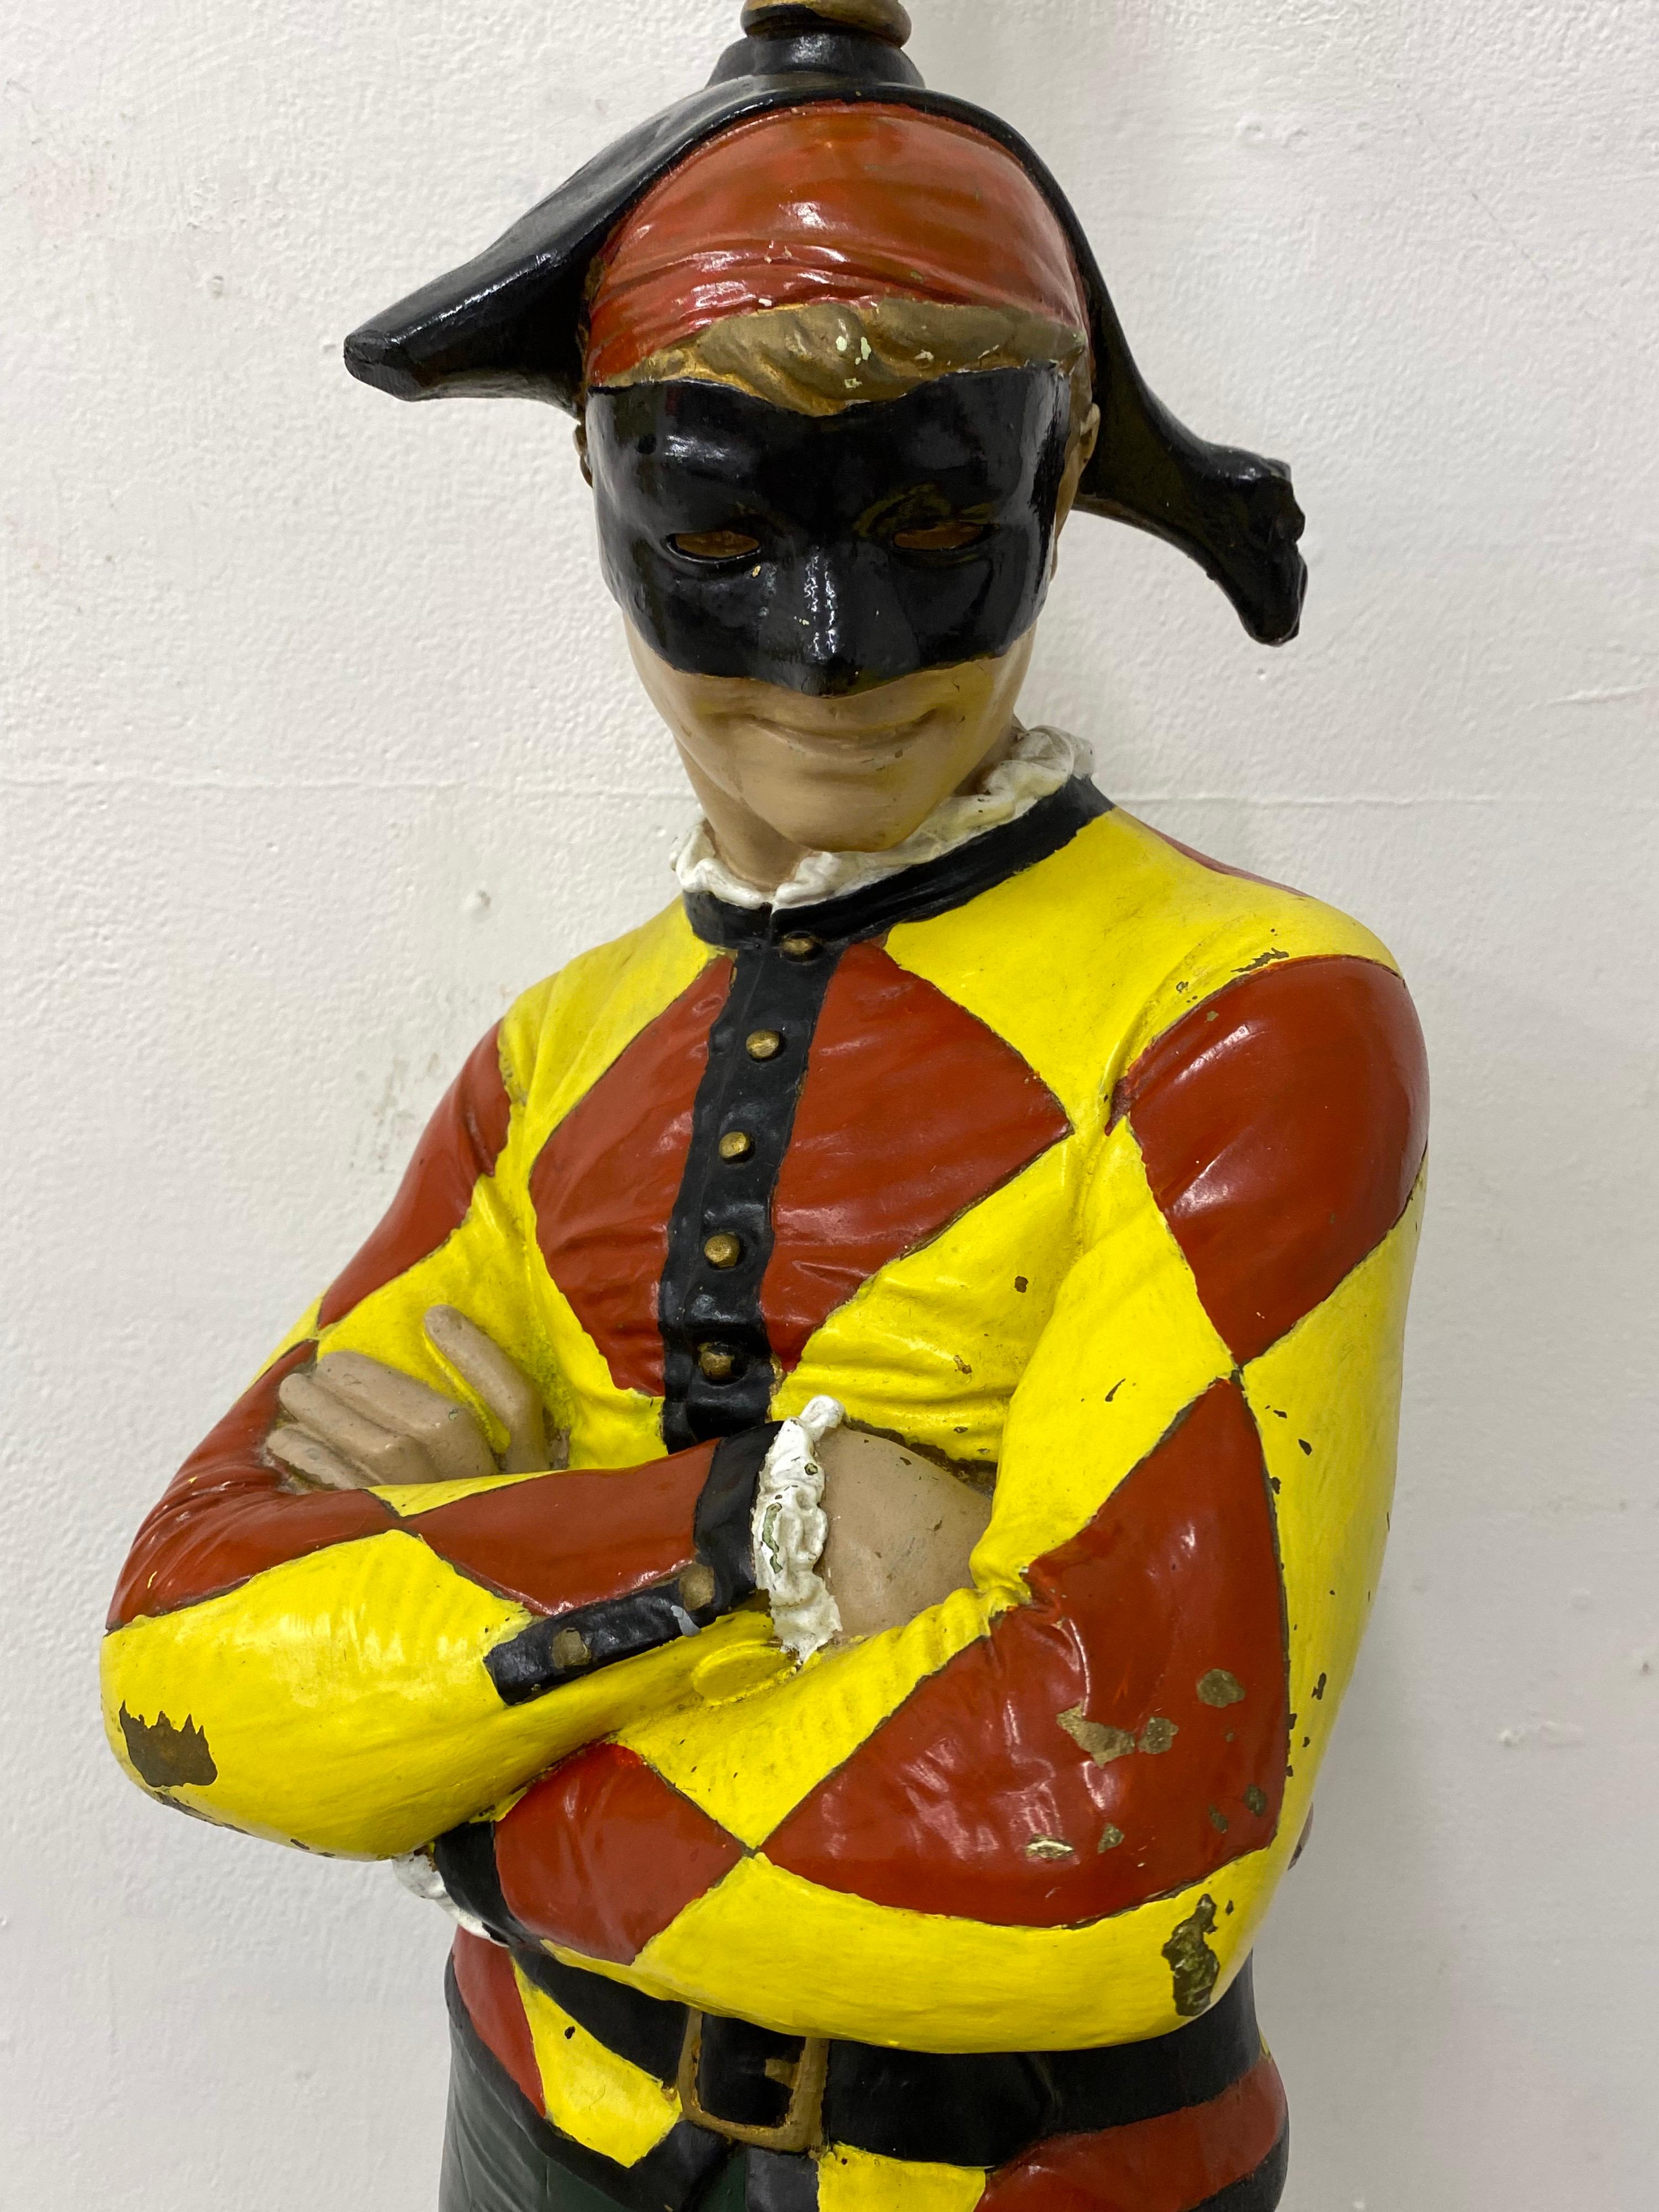 Marbro Harlequin Jester table lamp. Extra large figure painted with a red and yellow shirt and dark green pants. Looks like originally all gold and silver. Somewhere in it's life someone did a nice repaint in its current colors! A couple chips to